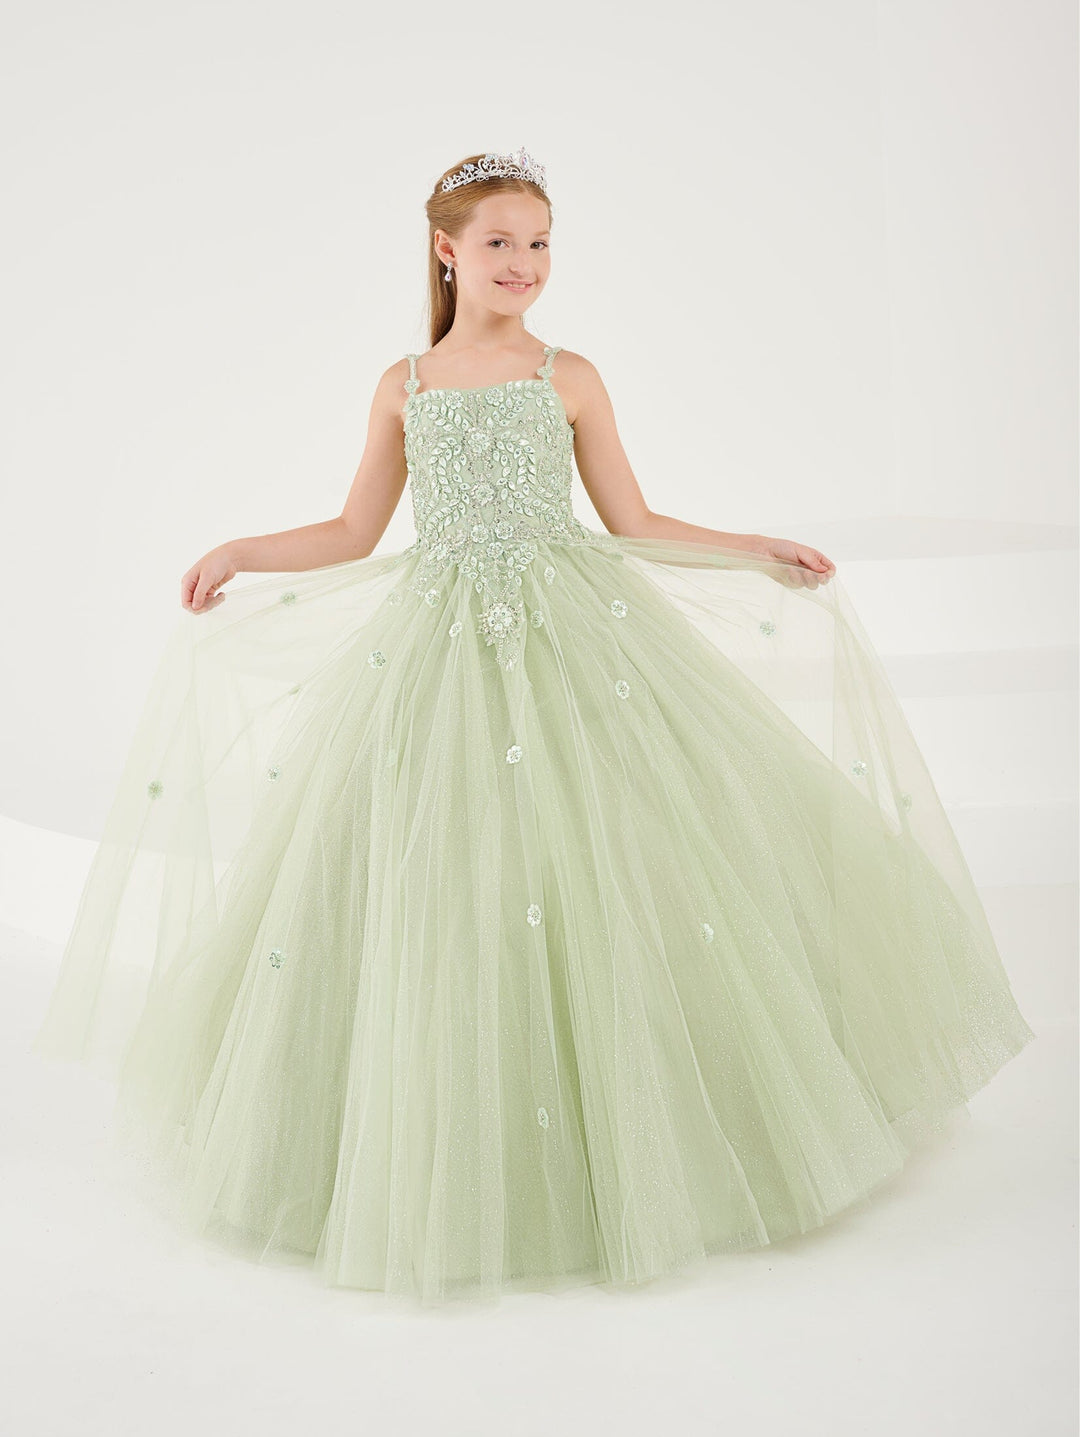 Girls Applique Sleeveless Gown by Tiffany Princess 13749